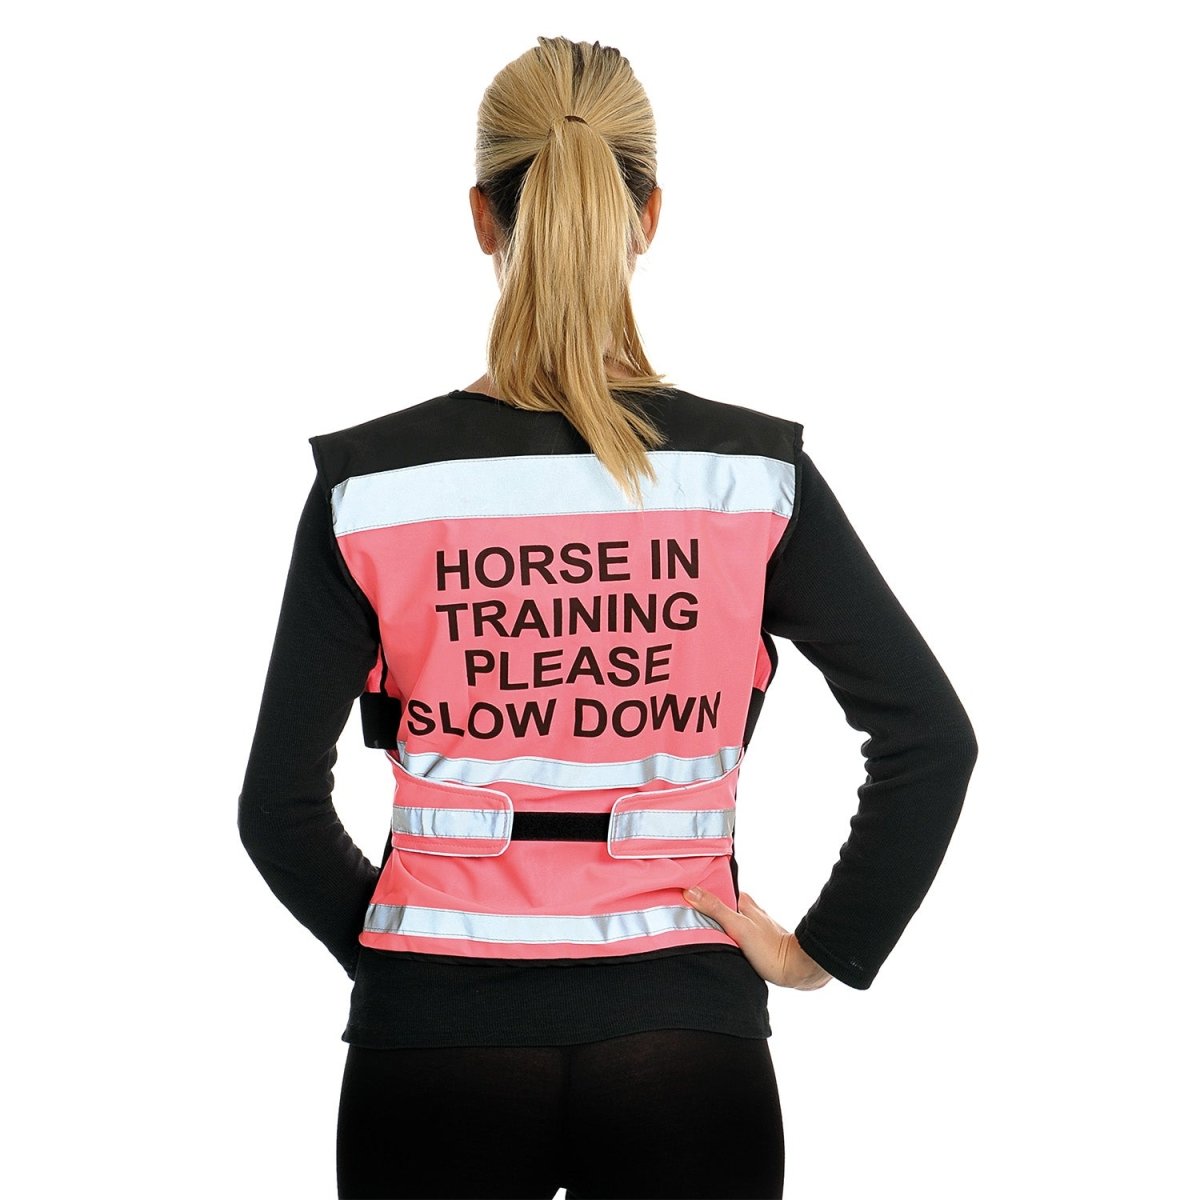 Equisafety Air Waistcoat Horse In Training Please Slow Down - Pink - Medium